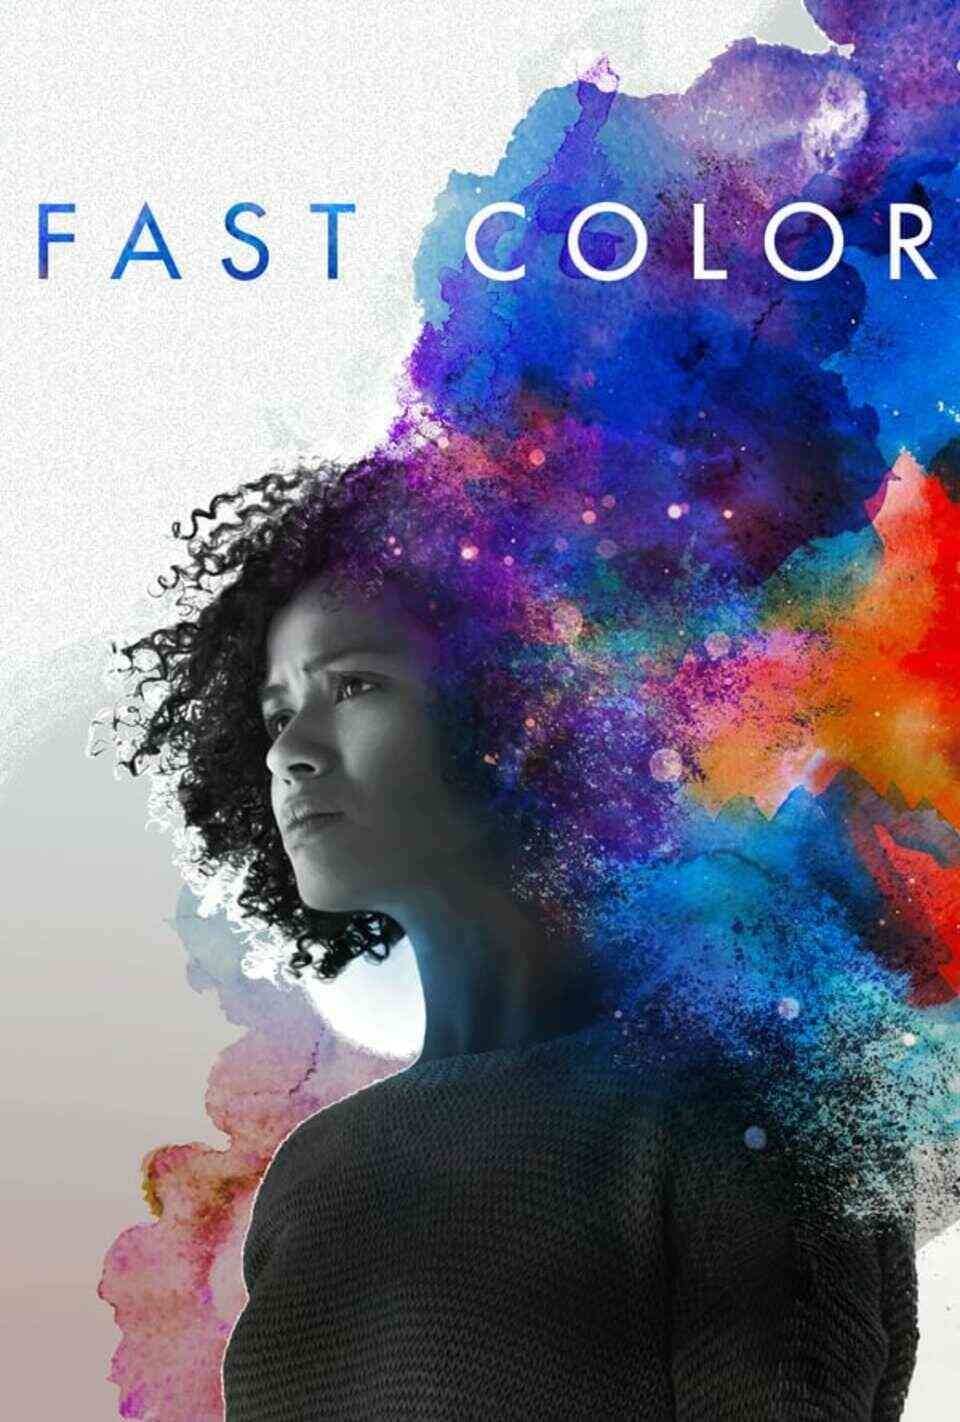 Read Fast Color screenplay.